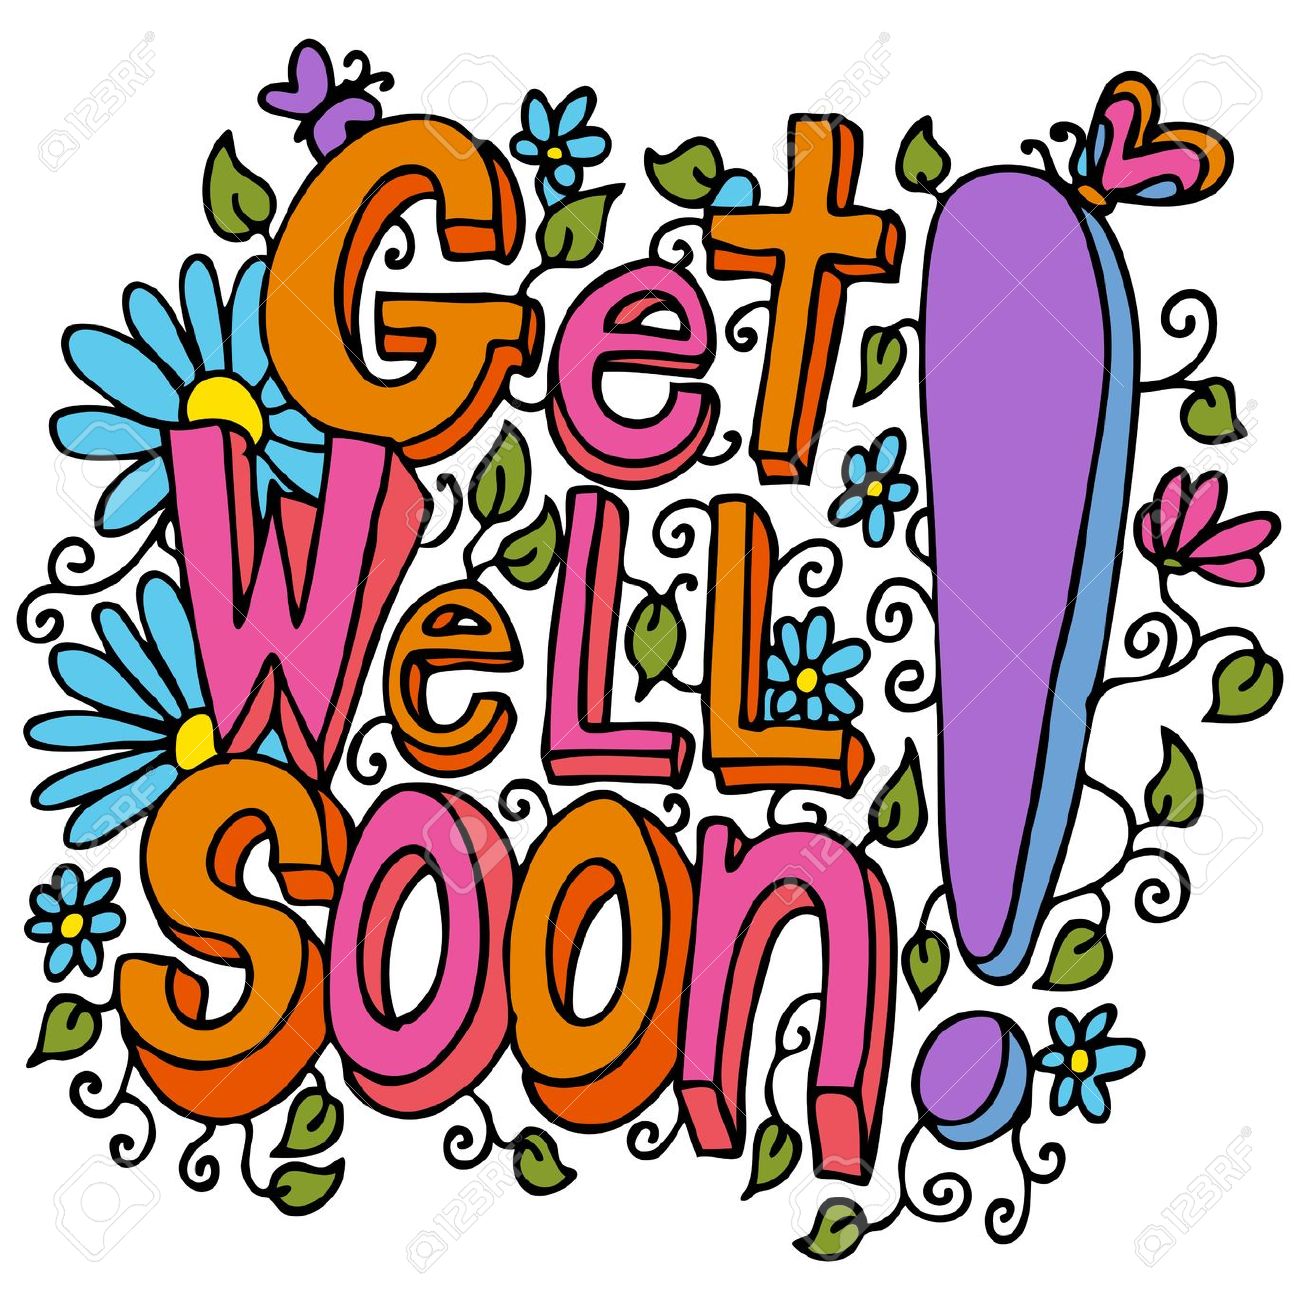 Free Get Well Soon Images Free download on ClipArtMag